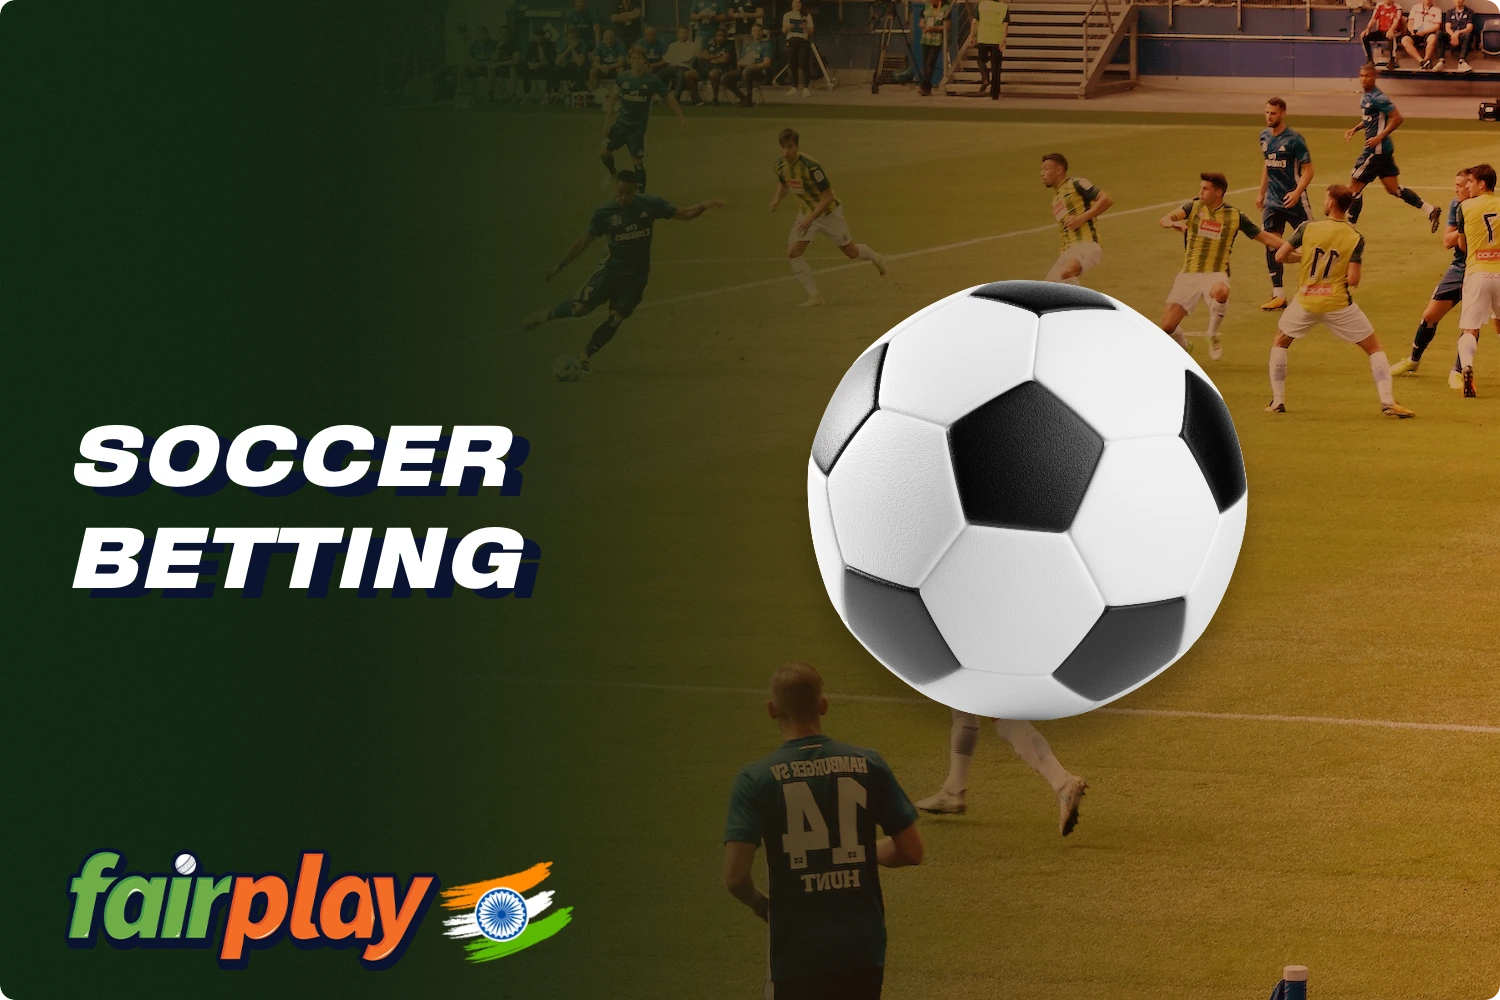 On the Fairplay platform, users from India can bet on soccer as well as popular tournaments